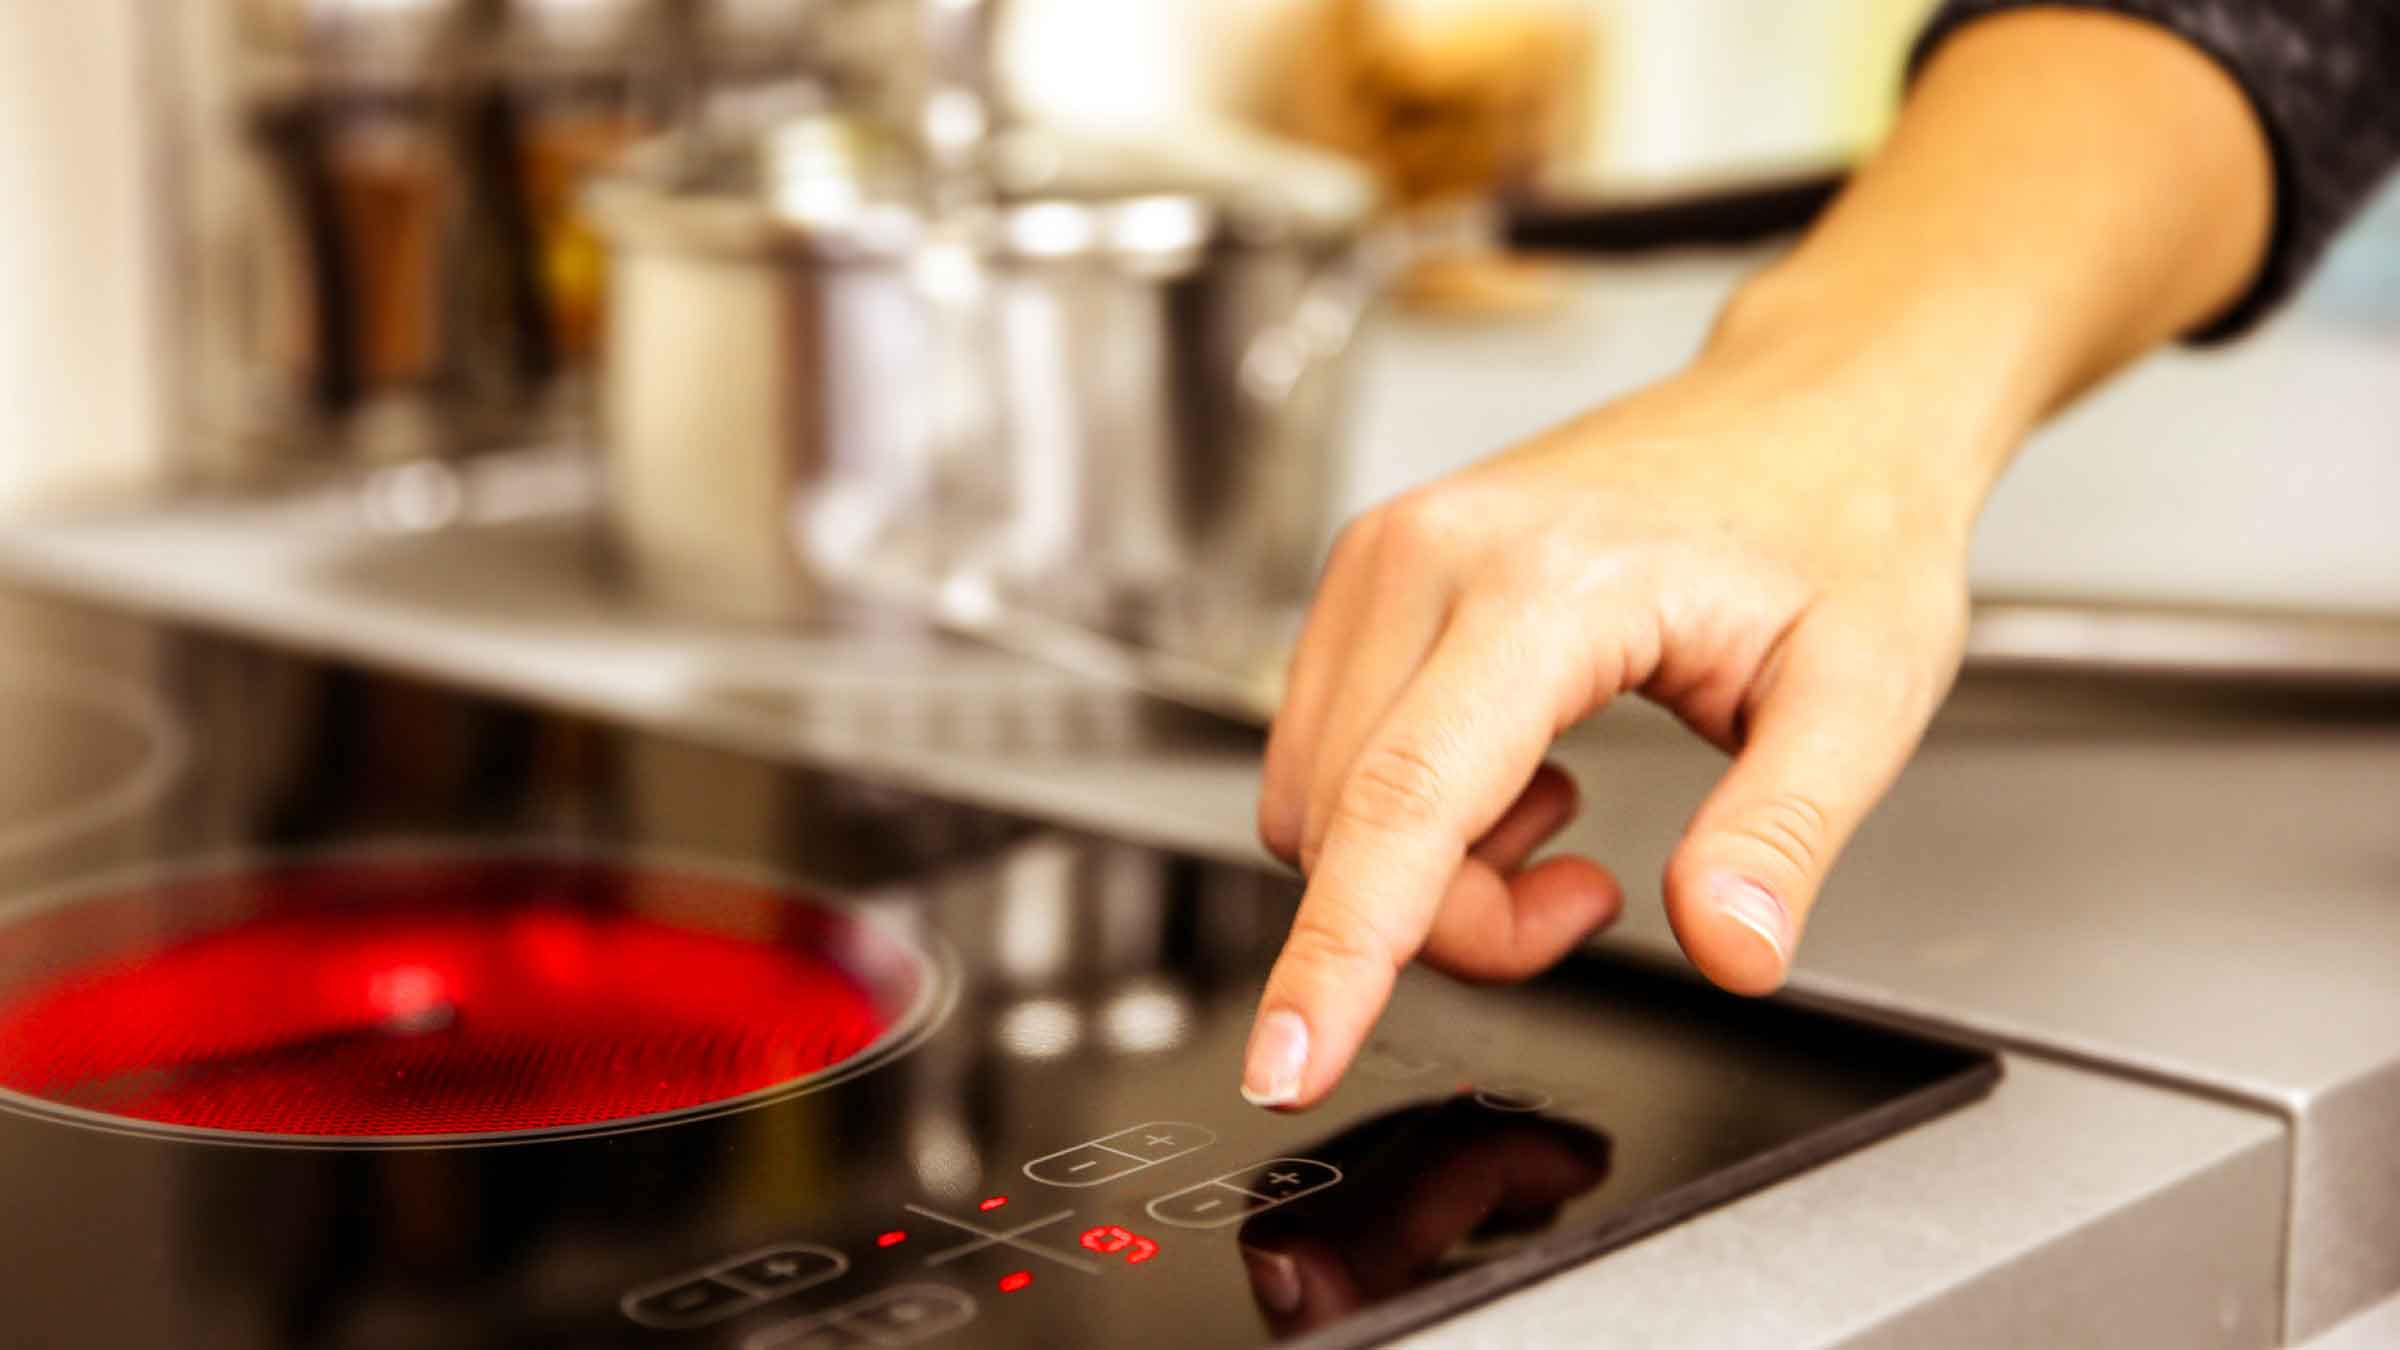 Corner of electric stovetop, bottom right ring is turned on and glowing red, a hand is reaching out to adjust the temperature gauge which is set to nine.